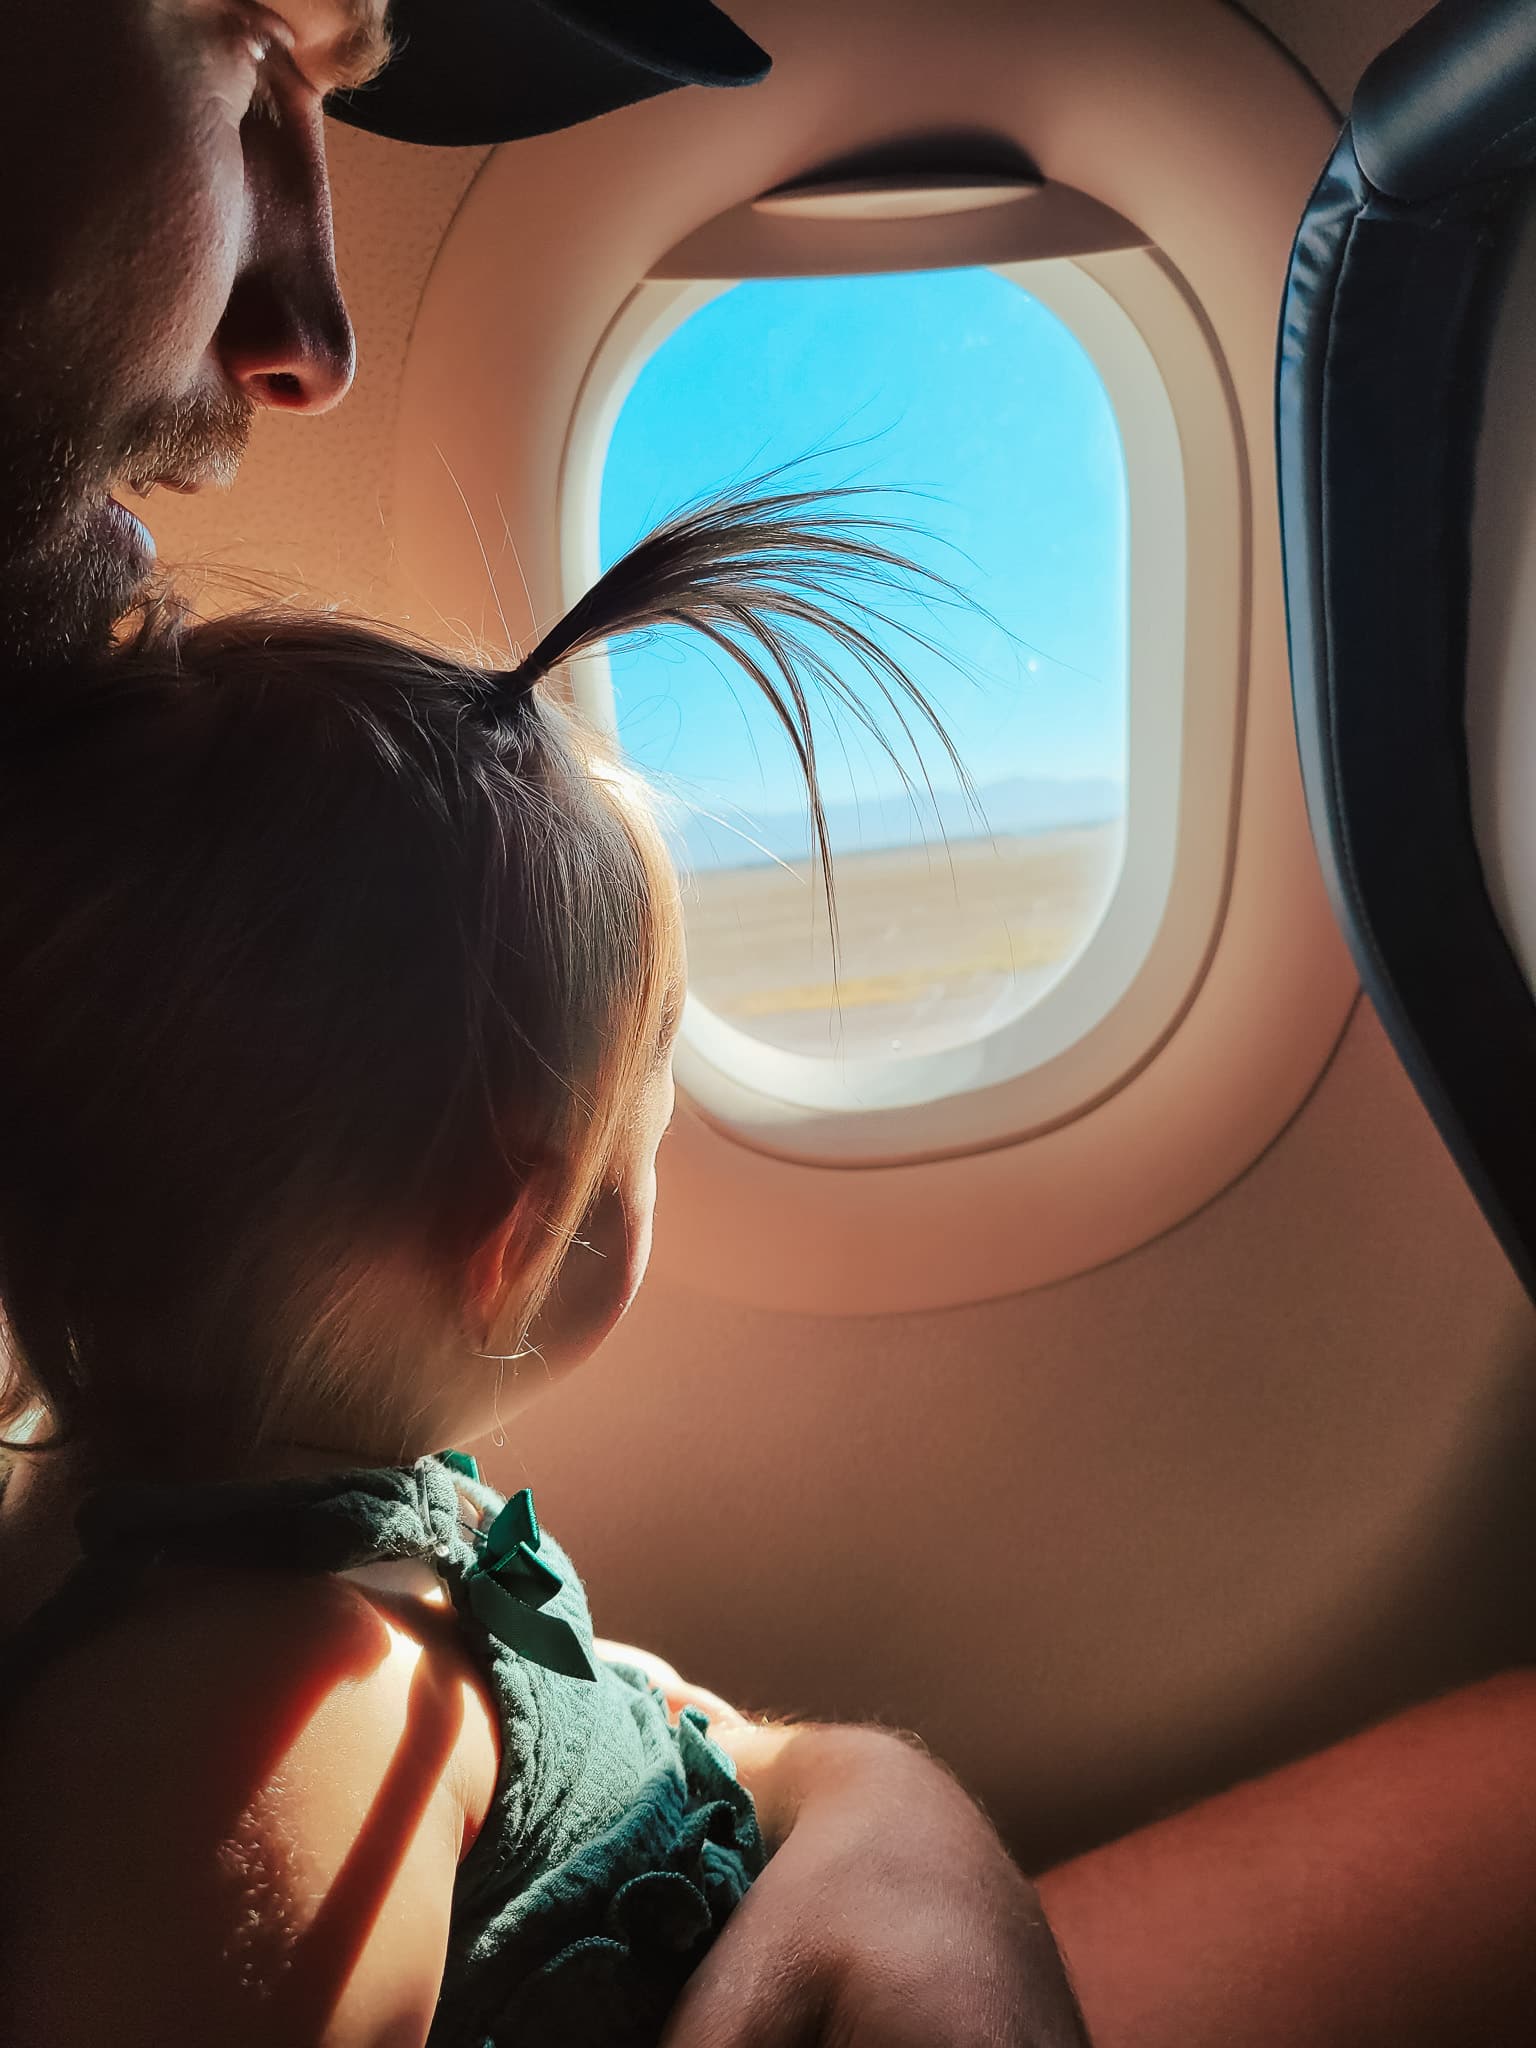 10 Best Travel Toys For Toddlers On Airplanes (+ CUTEST Toddler Luggage!) 